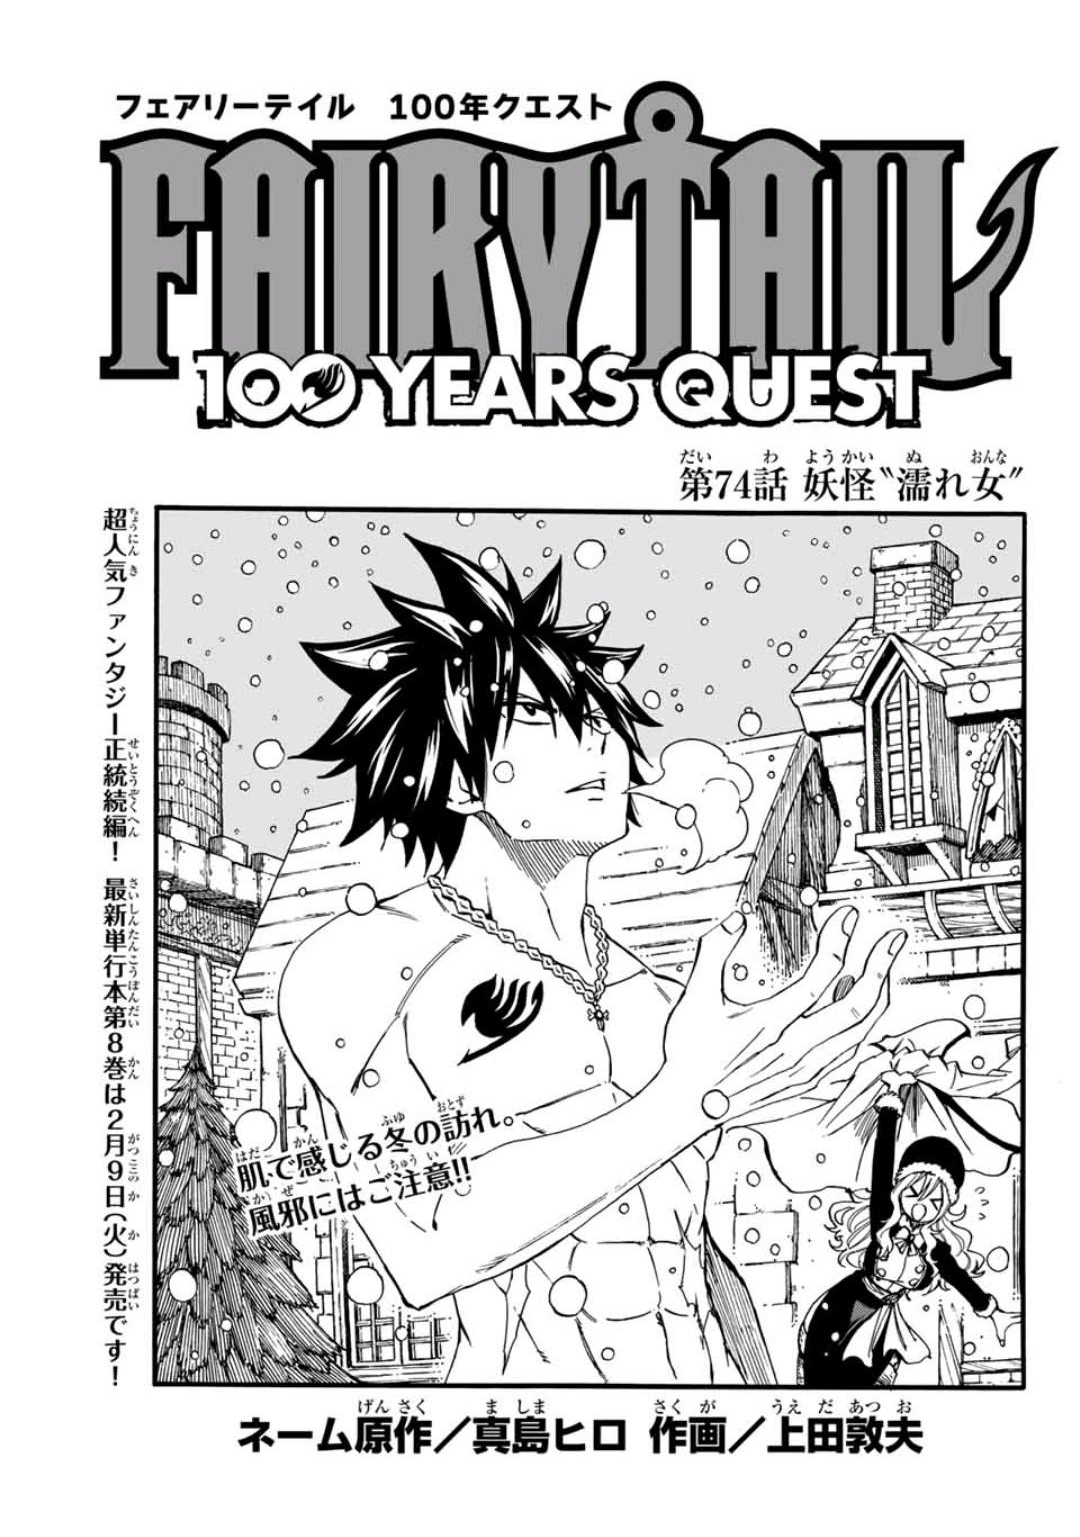 Characters appearing in Fairy Tail: 100 Years Quest Manga